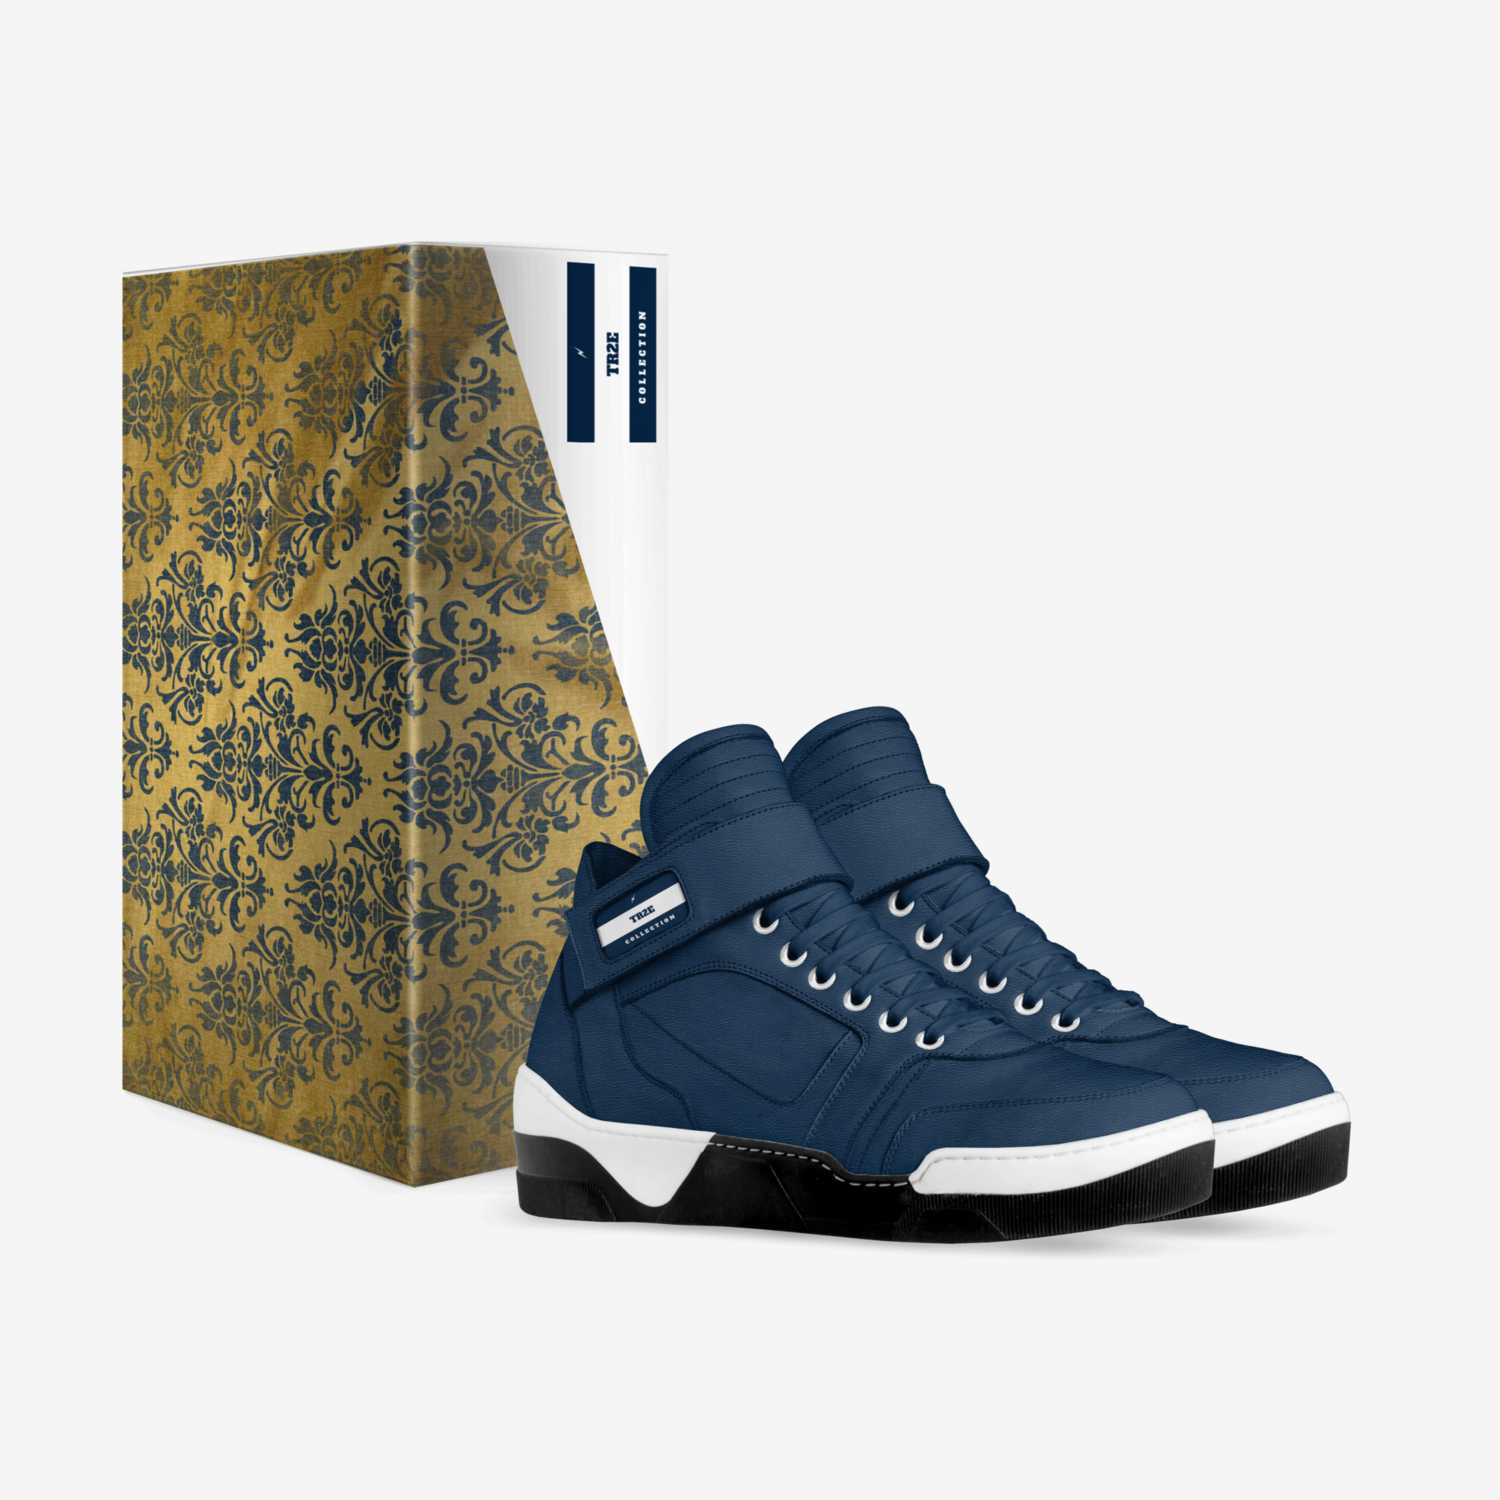 TR2E custom made in Italy shoes by Jordan Sloan | Box view